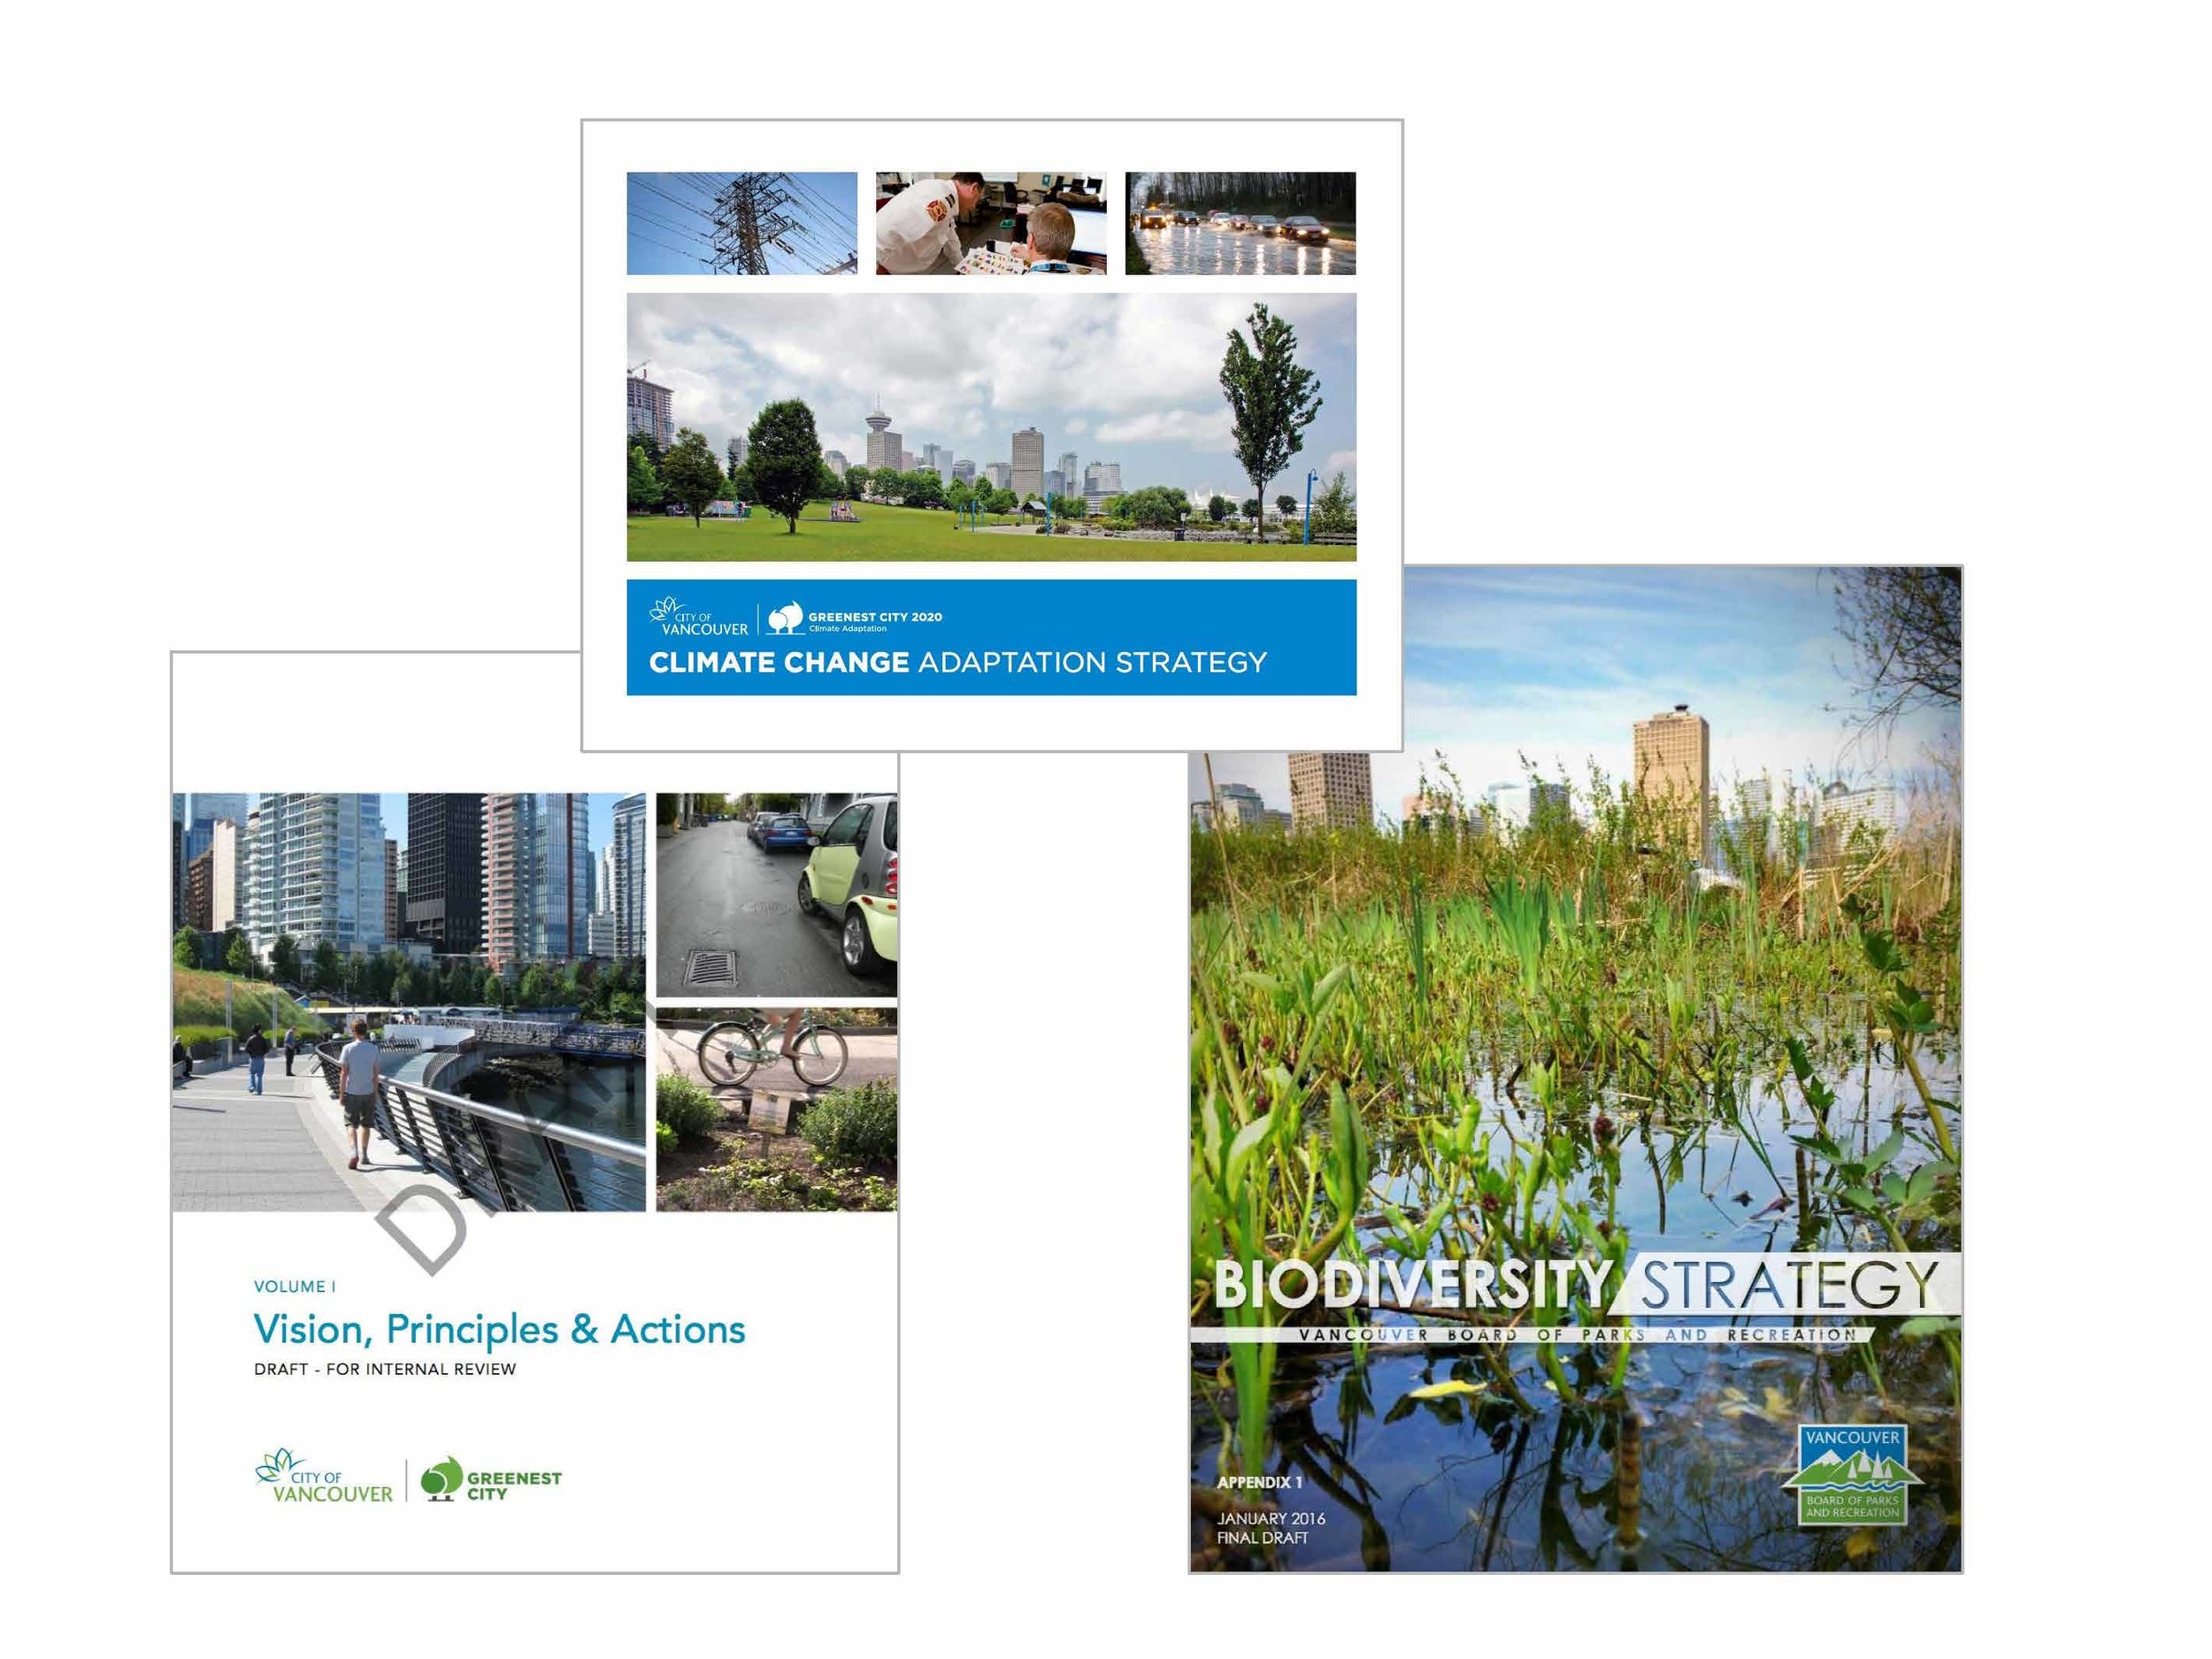  Until recently there hasn't been an overarching City policy to guide projects like the Rainway, however this might be changing with the IRMP, Climate change adaptation strategy, and Biodiversity Strategy 